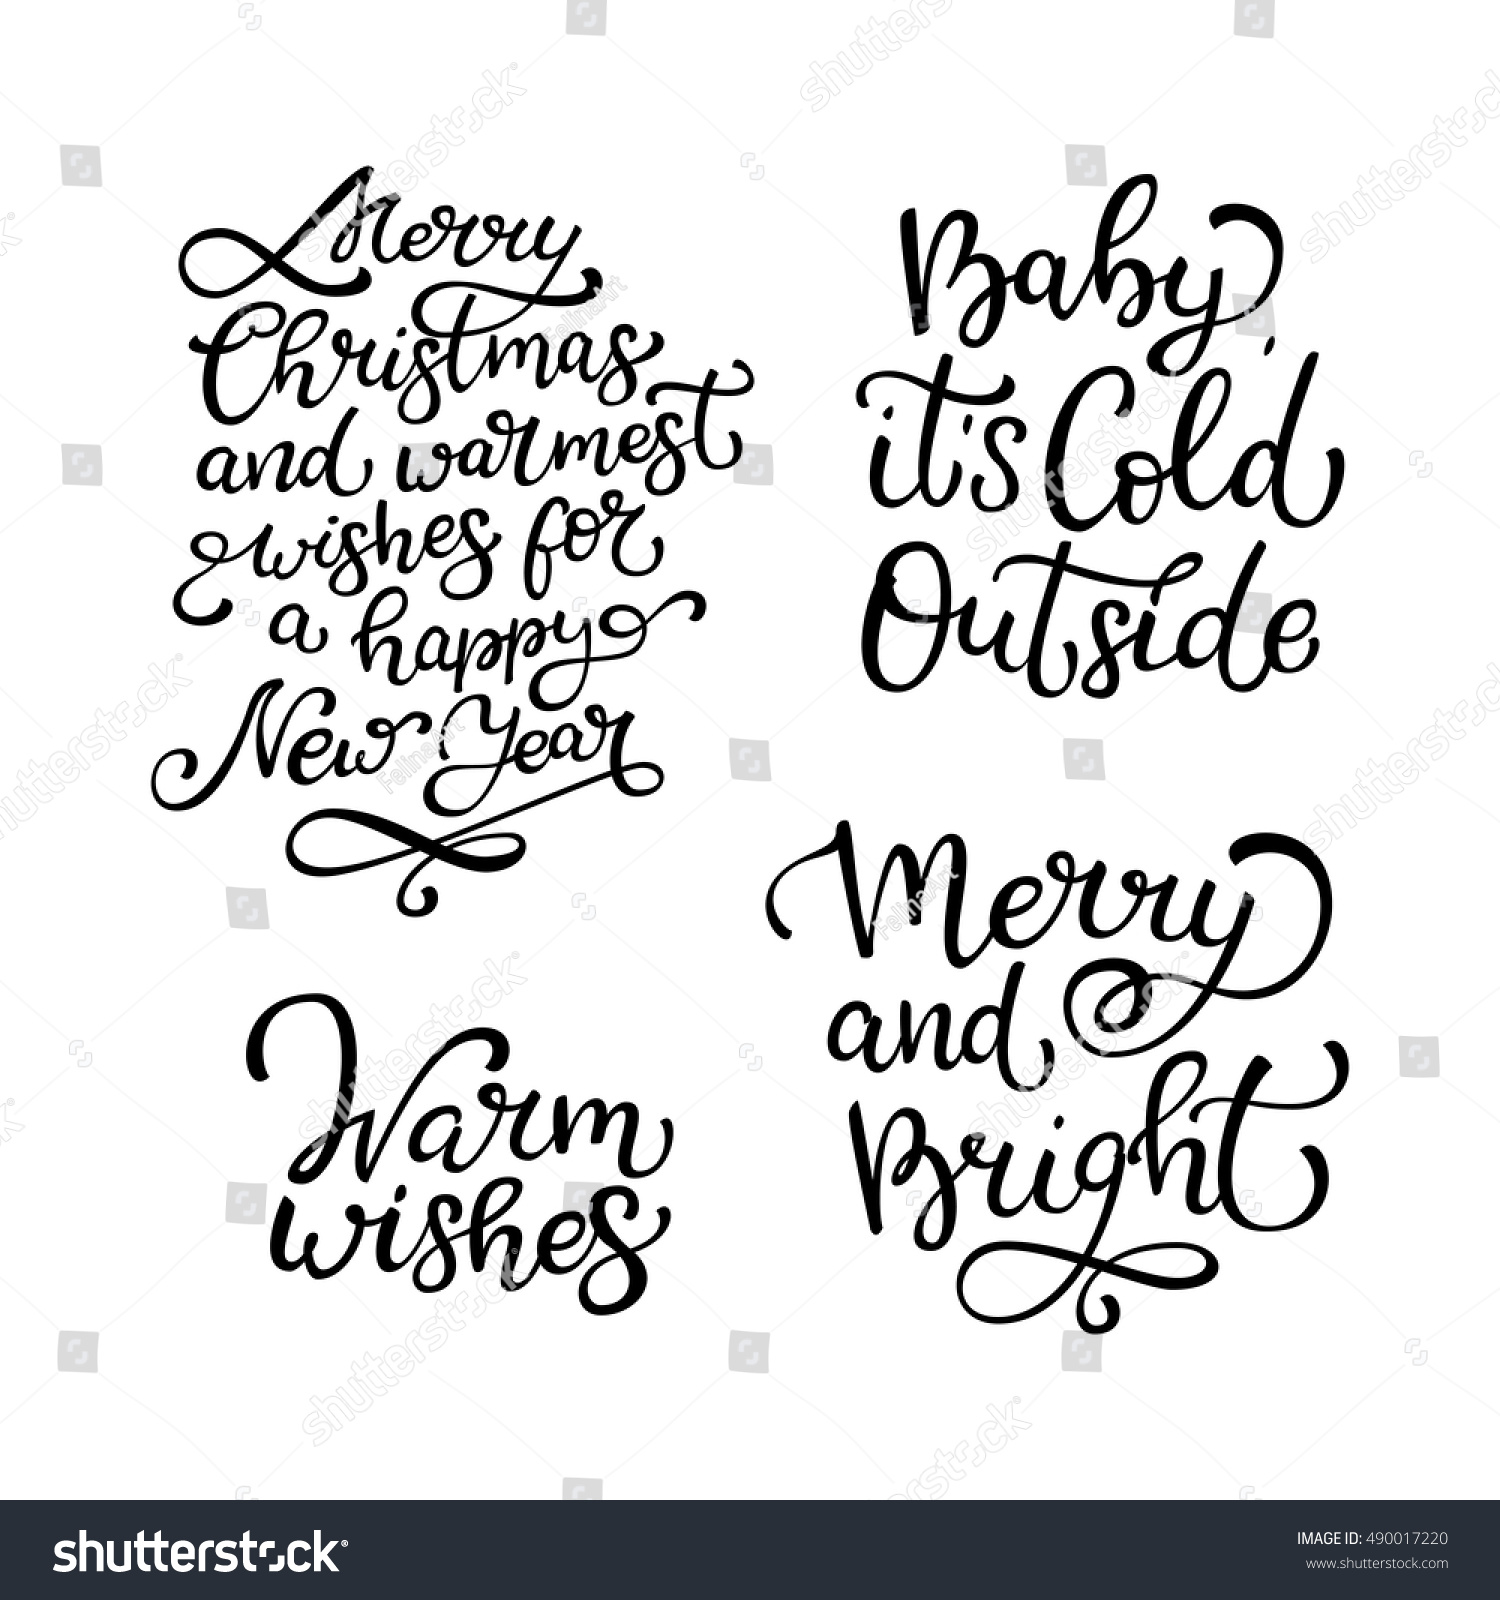 Set of hand drawn vector quotes Warm wishes Merry and Bright Baby it